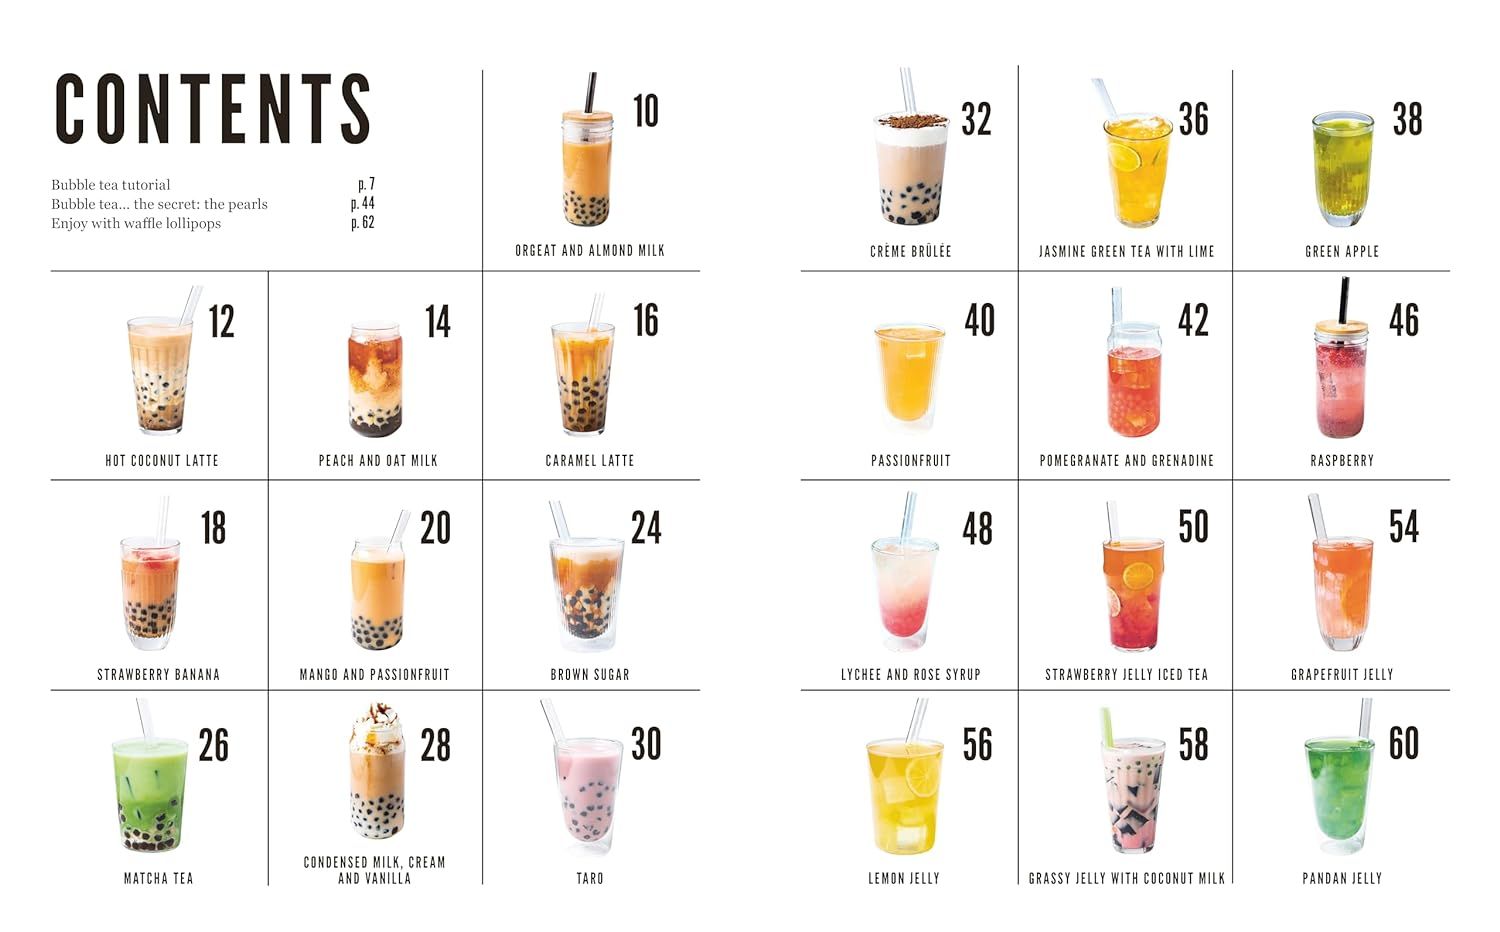  Bubble Tea: Make your own at home 